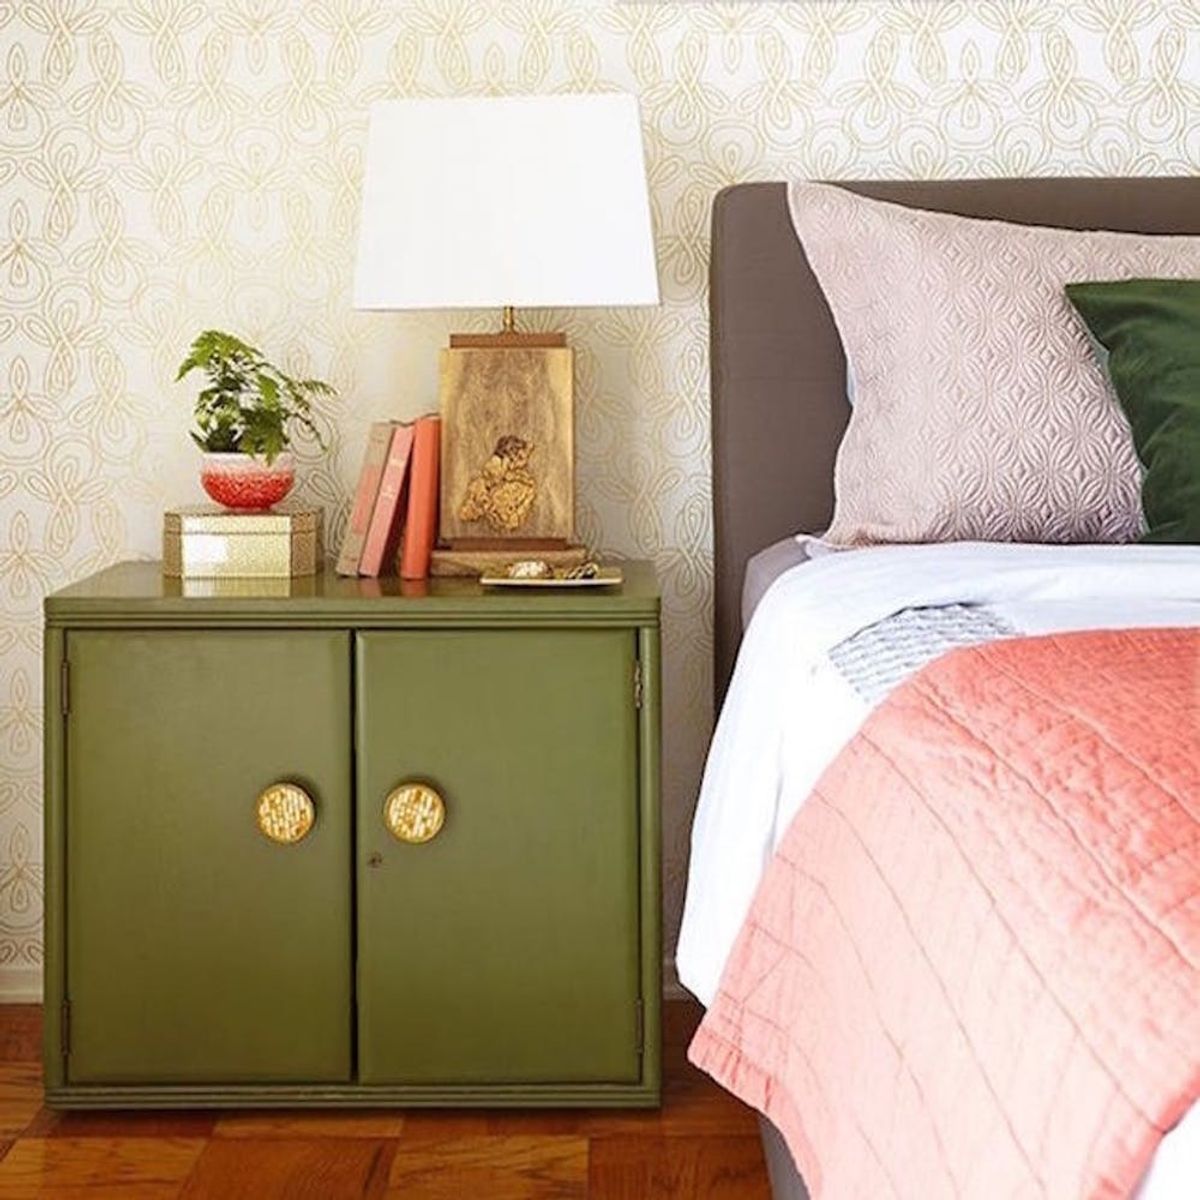 12 Ways to Decorate With August’s Birthstone: Peridot